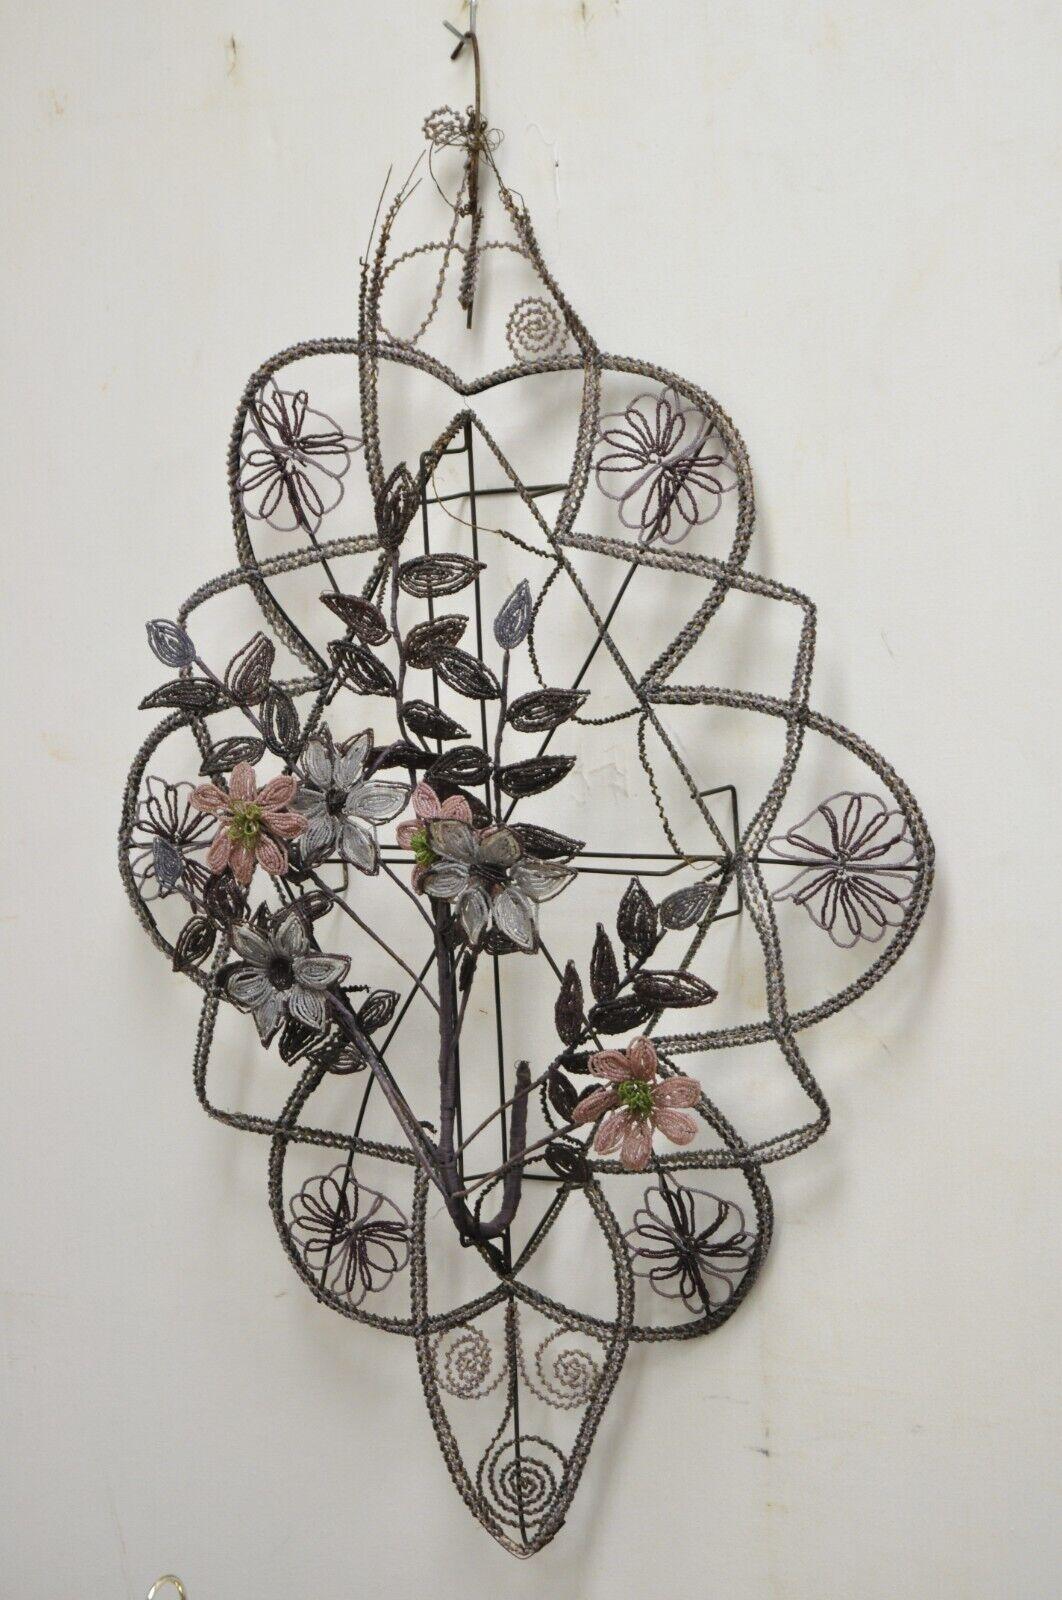 Antique french Victorian purple glass beaded memorial wreath wall sculpture. Circa 19th century. Measurements: 40